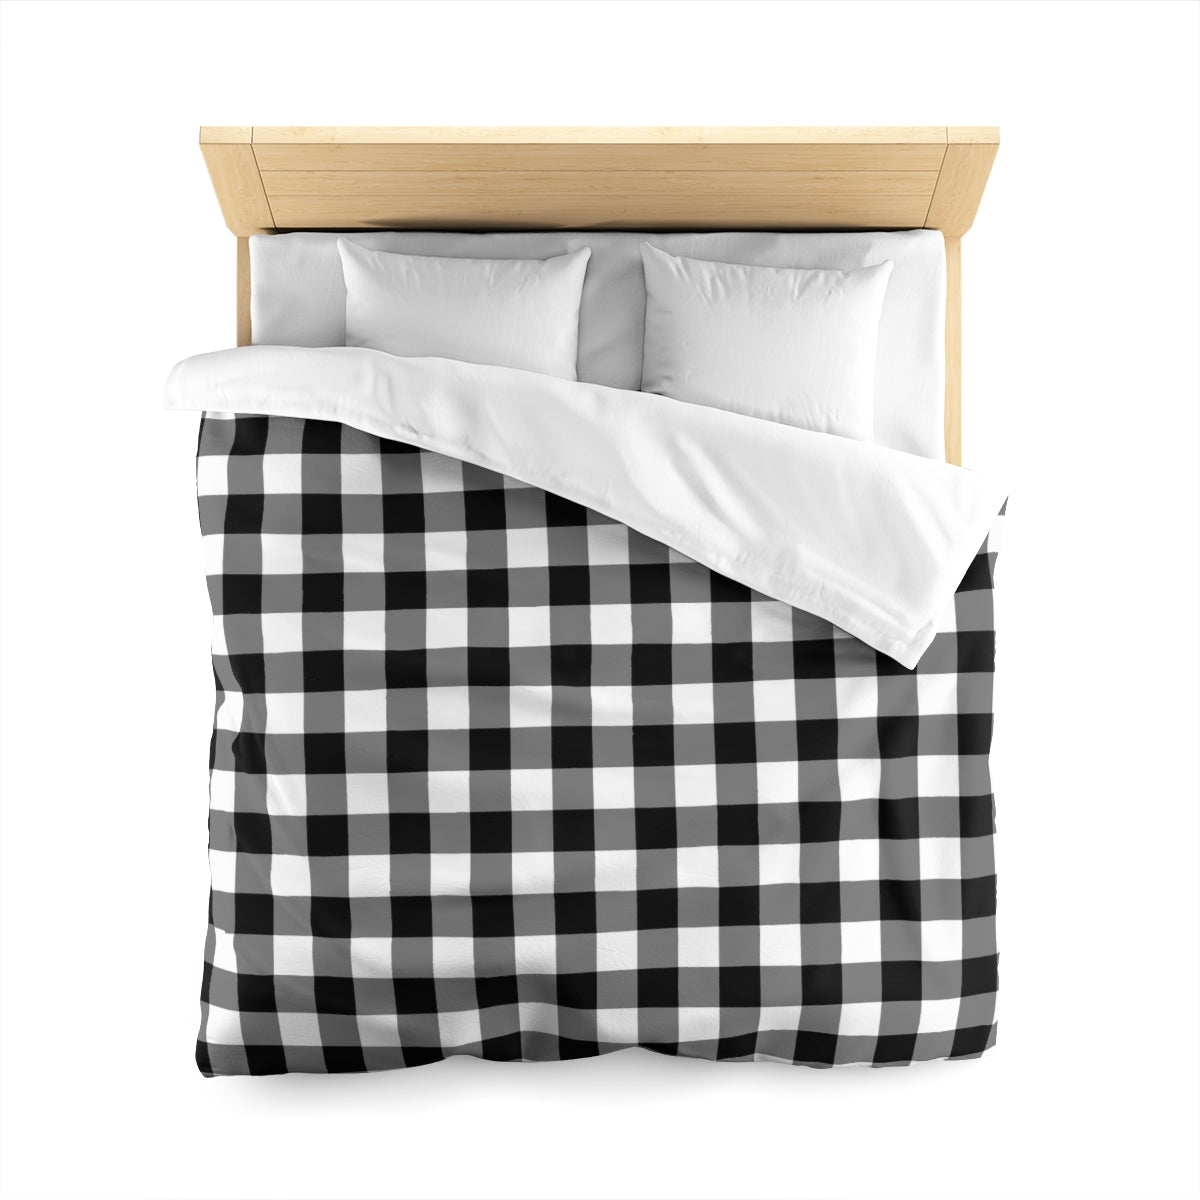 Black & White Checked Gingham Can Opener Cover 